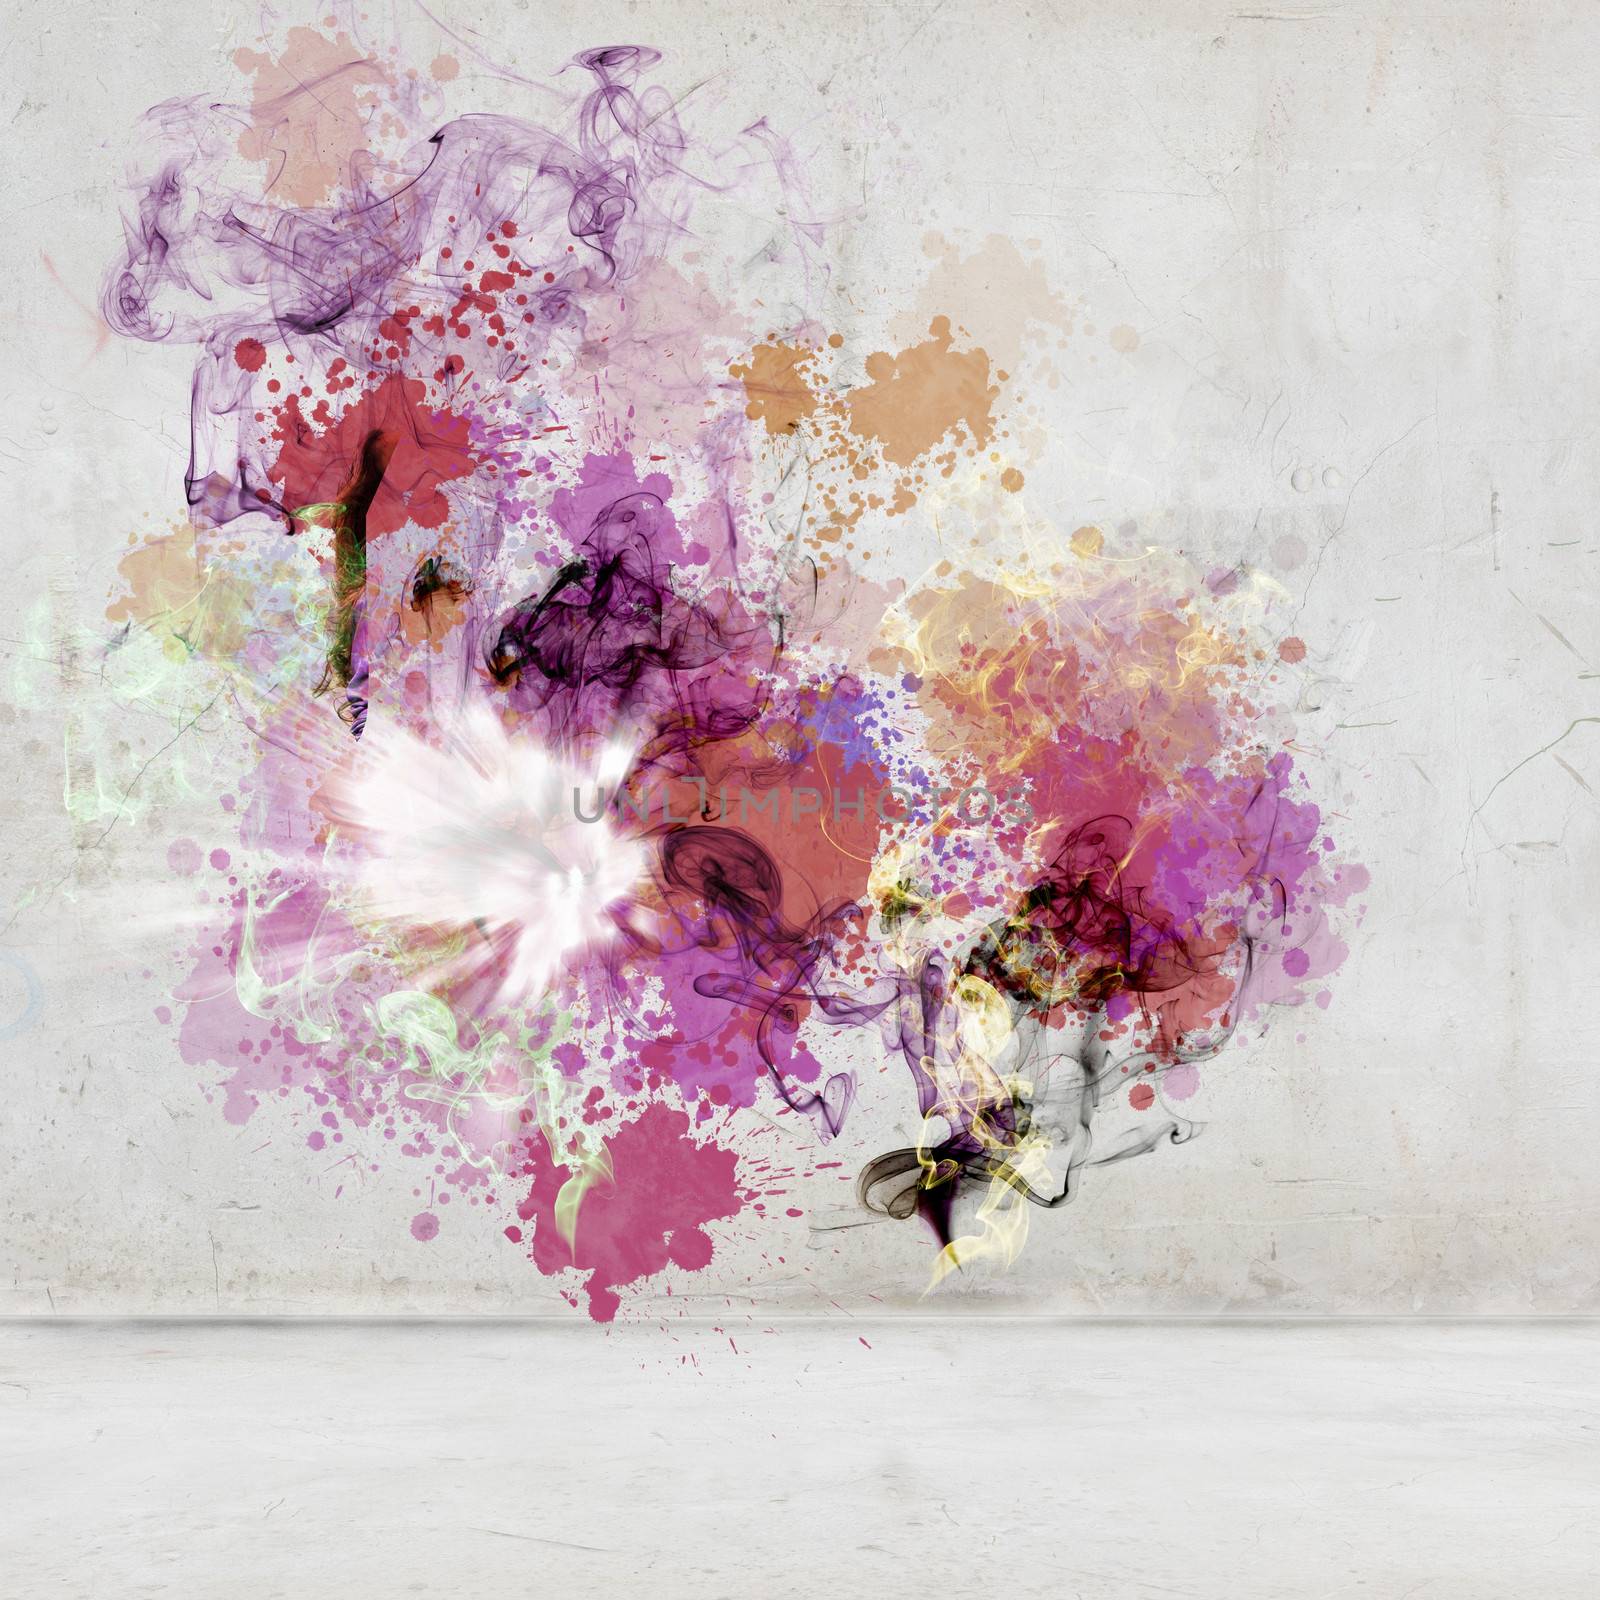 Background image with color fumes and splashes